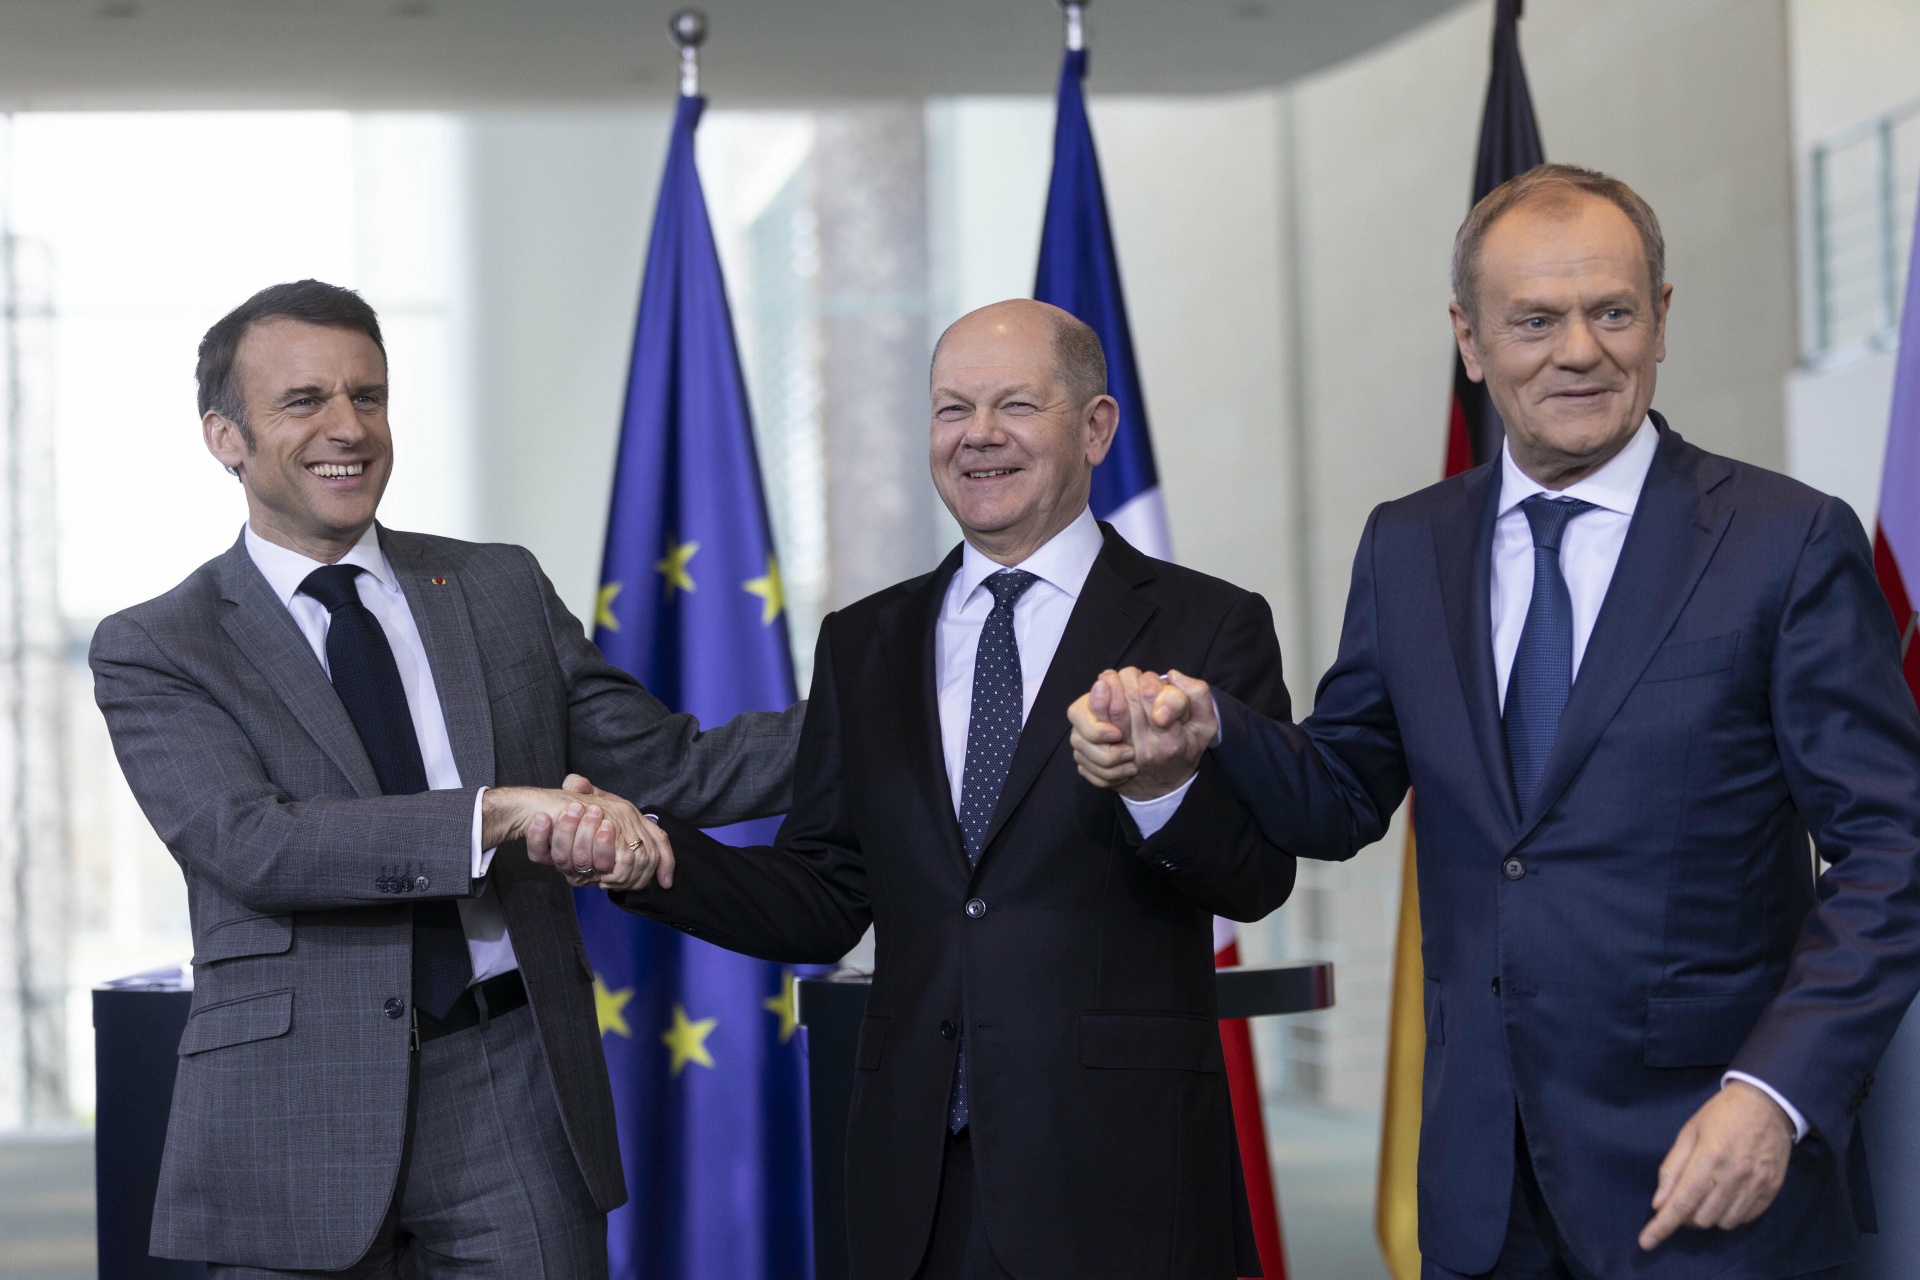 Photo of Donald Tusk, Prime Minister of Poland (R), Olaf Scholz, Federal Chancellor of Germany (M), and Emmanuel Macron, President of France (L), taken at a press conference in the Federal Chancellery in Berlin, March 15, 2024.